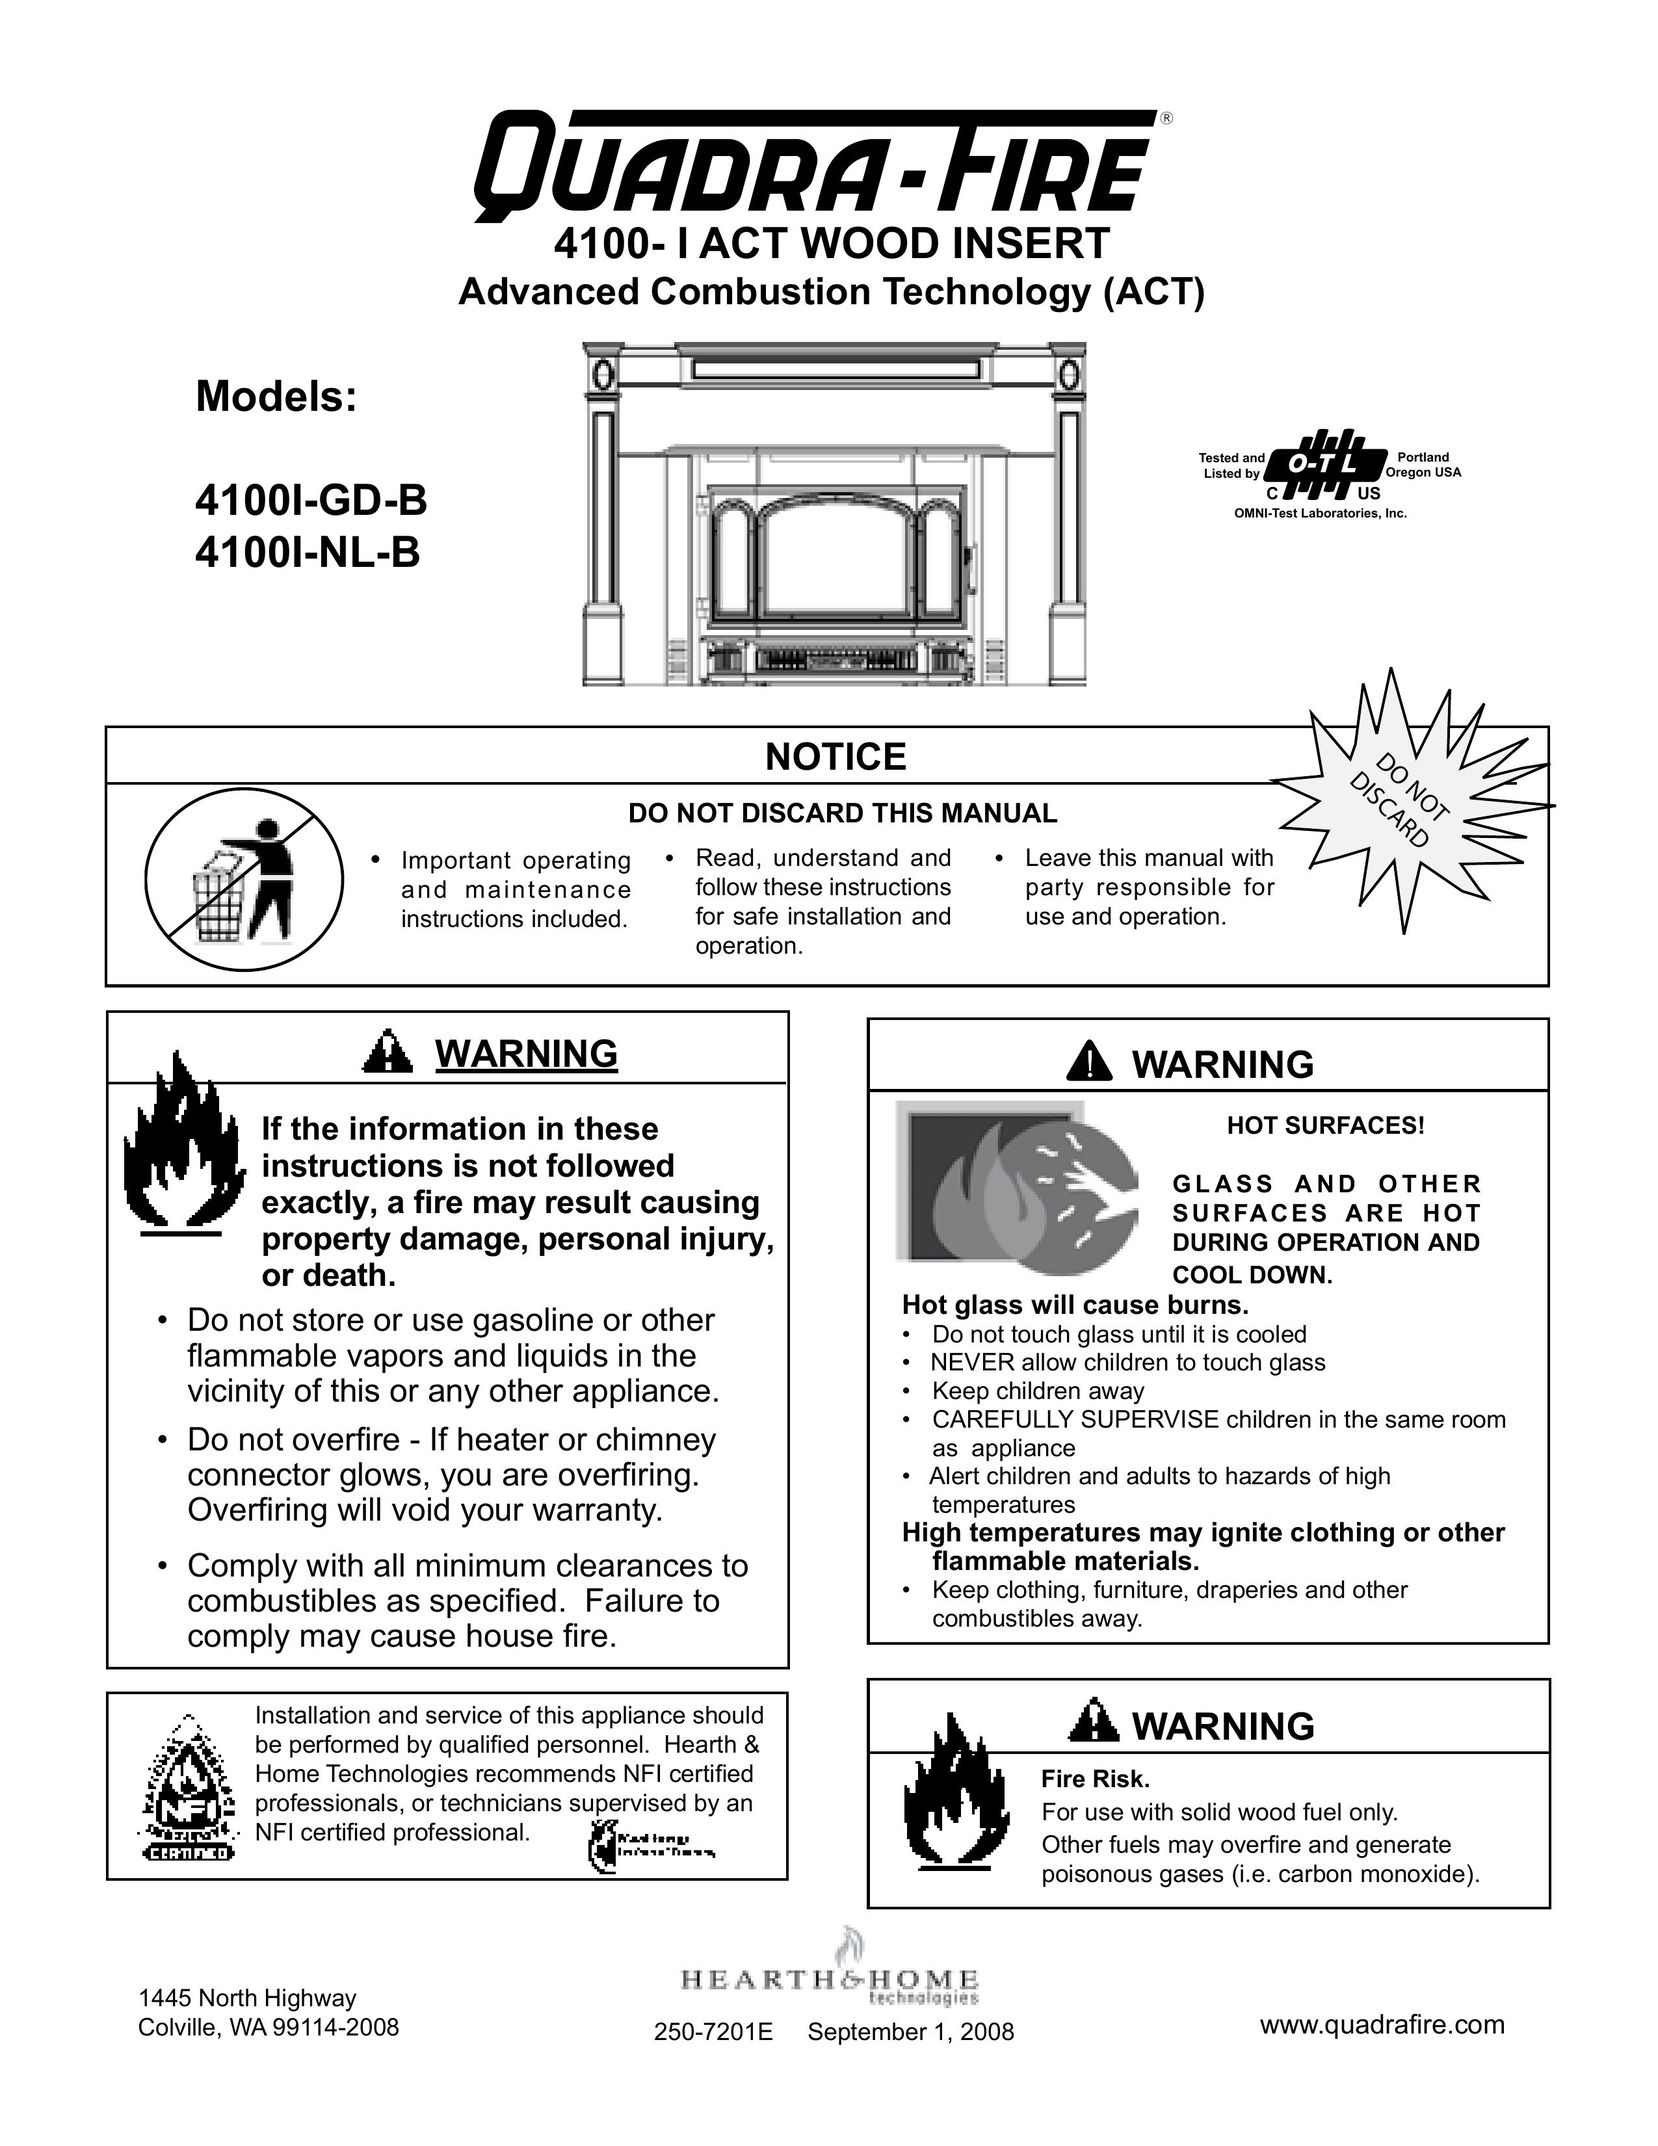 Hearth and Home Technologies 4100I-GD-B Indoor Fireplace User Manual